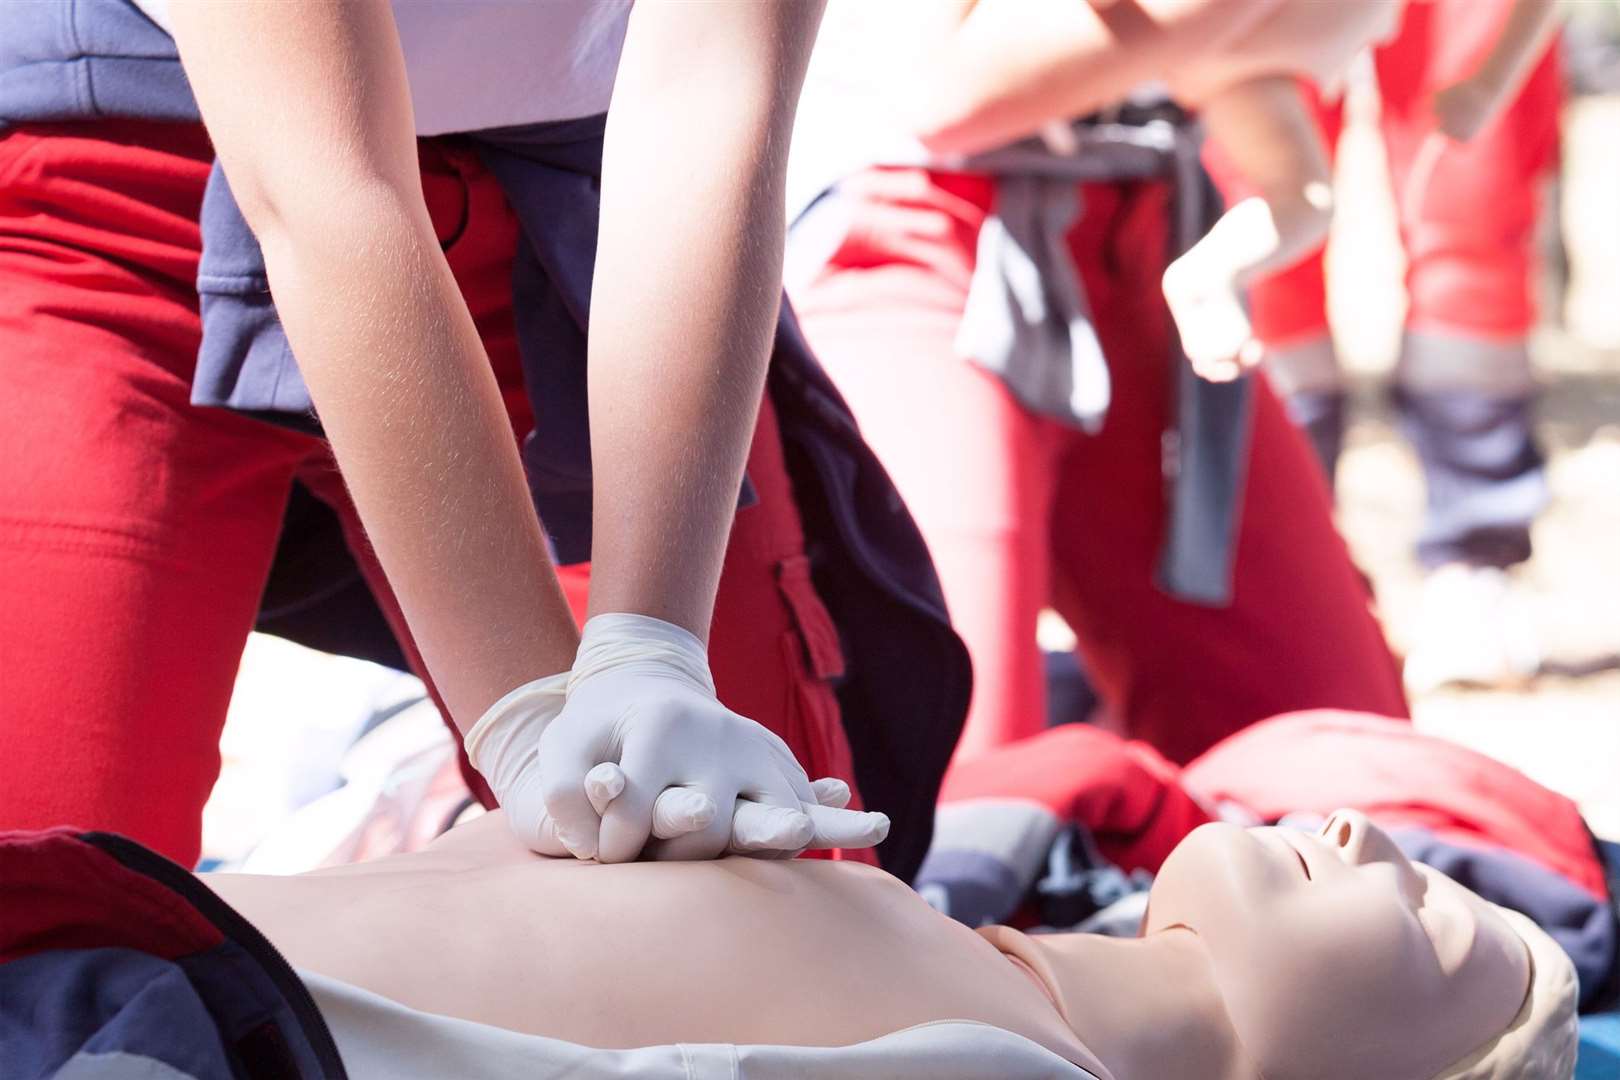 A paramedic demonstrates CPR on a dummy